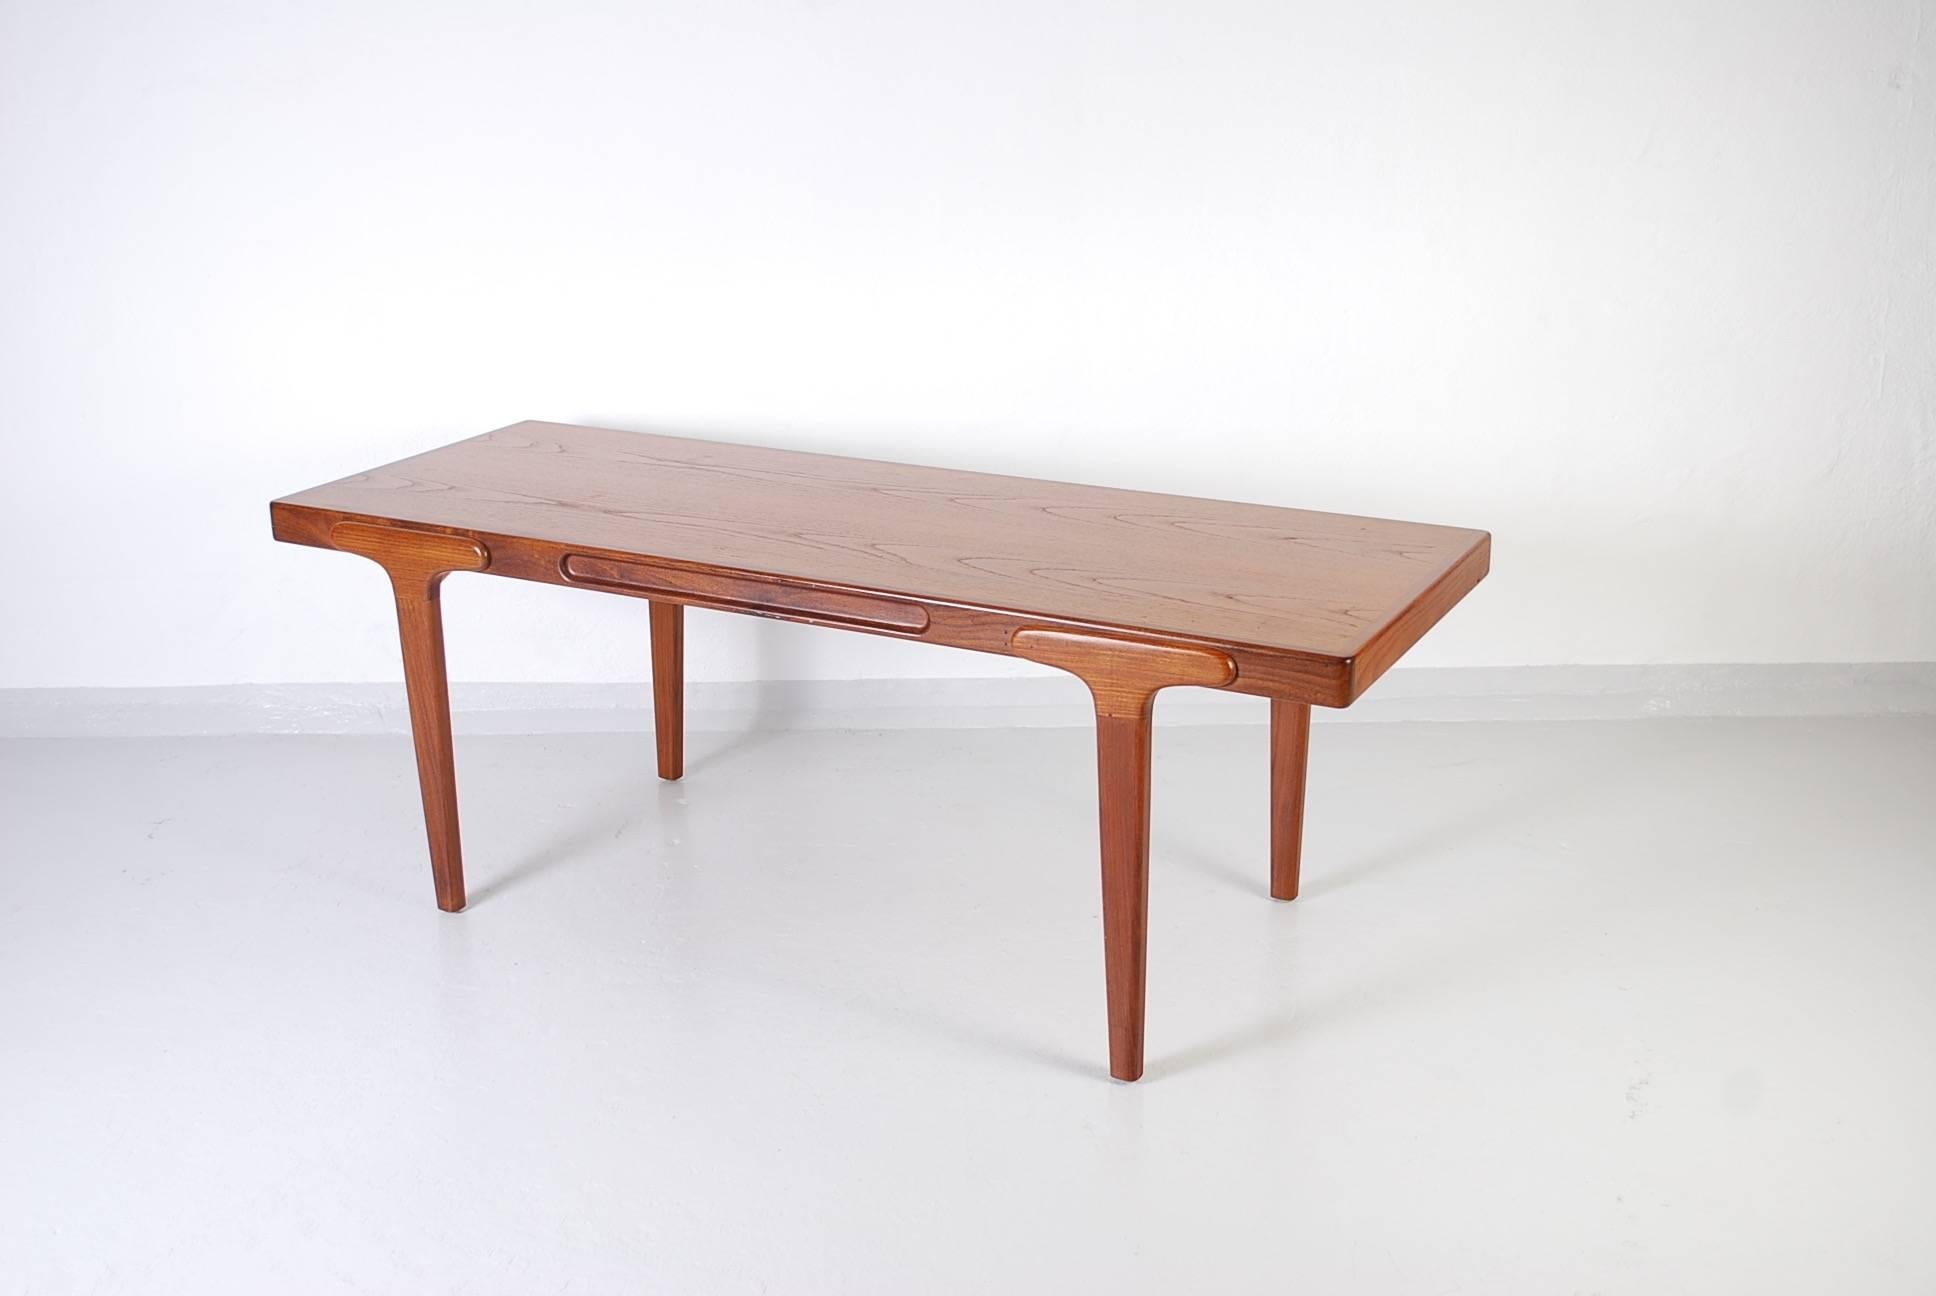 This midcentury Danish teak coffee table is in very good vintage condition. The table has sculptured legs and nice details.

